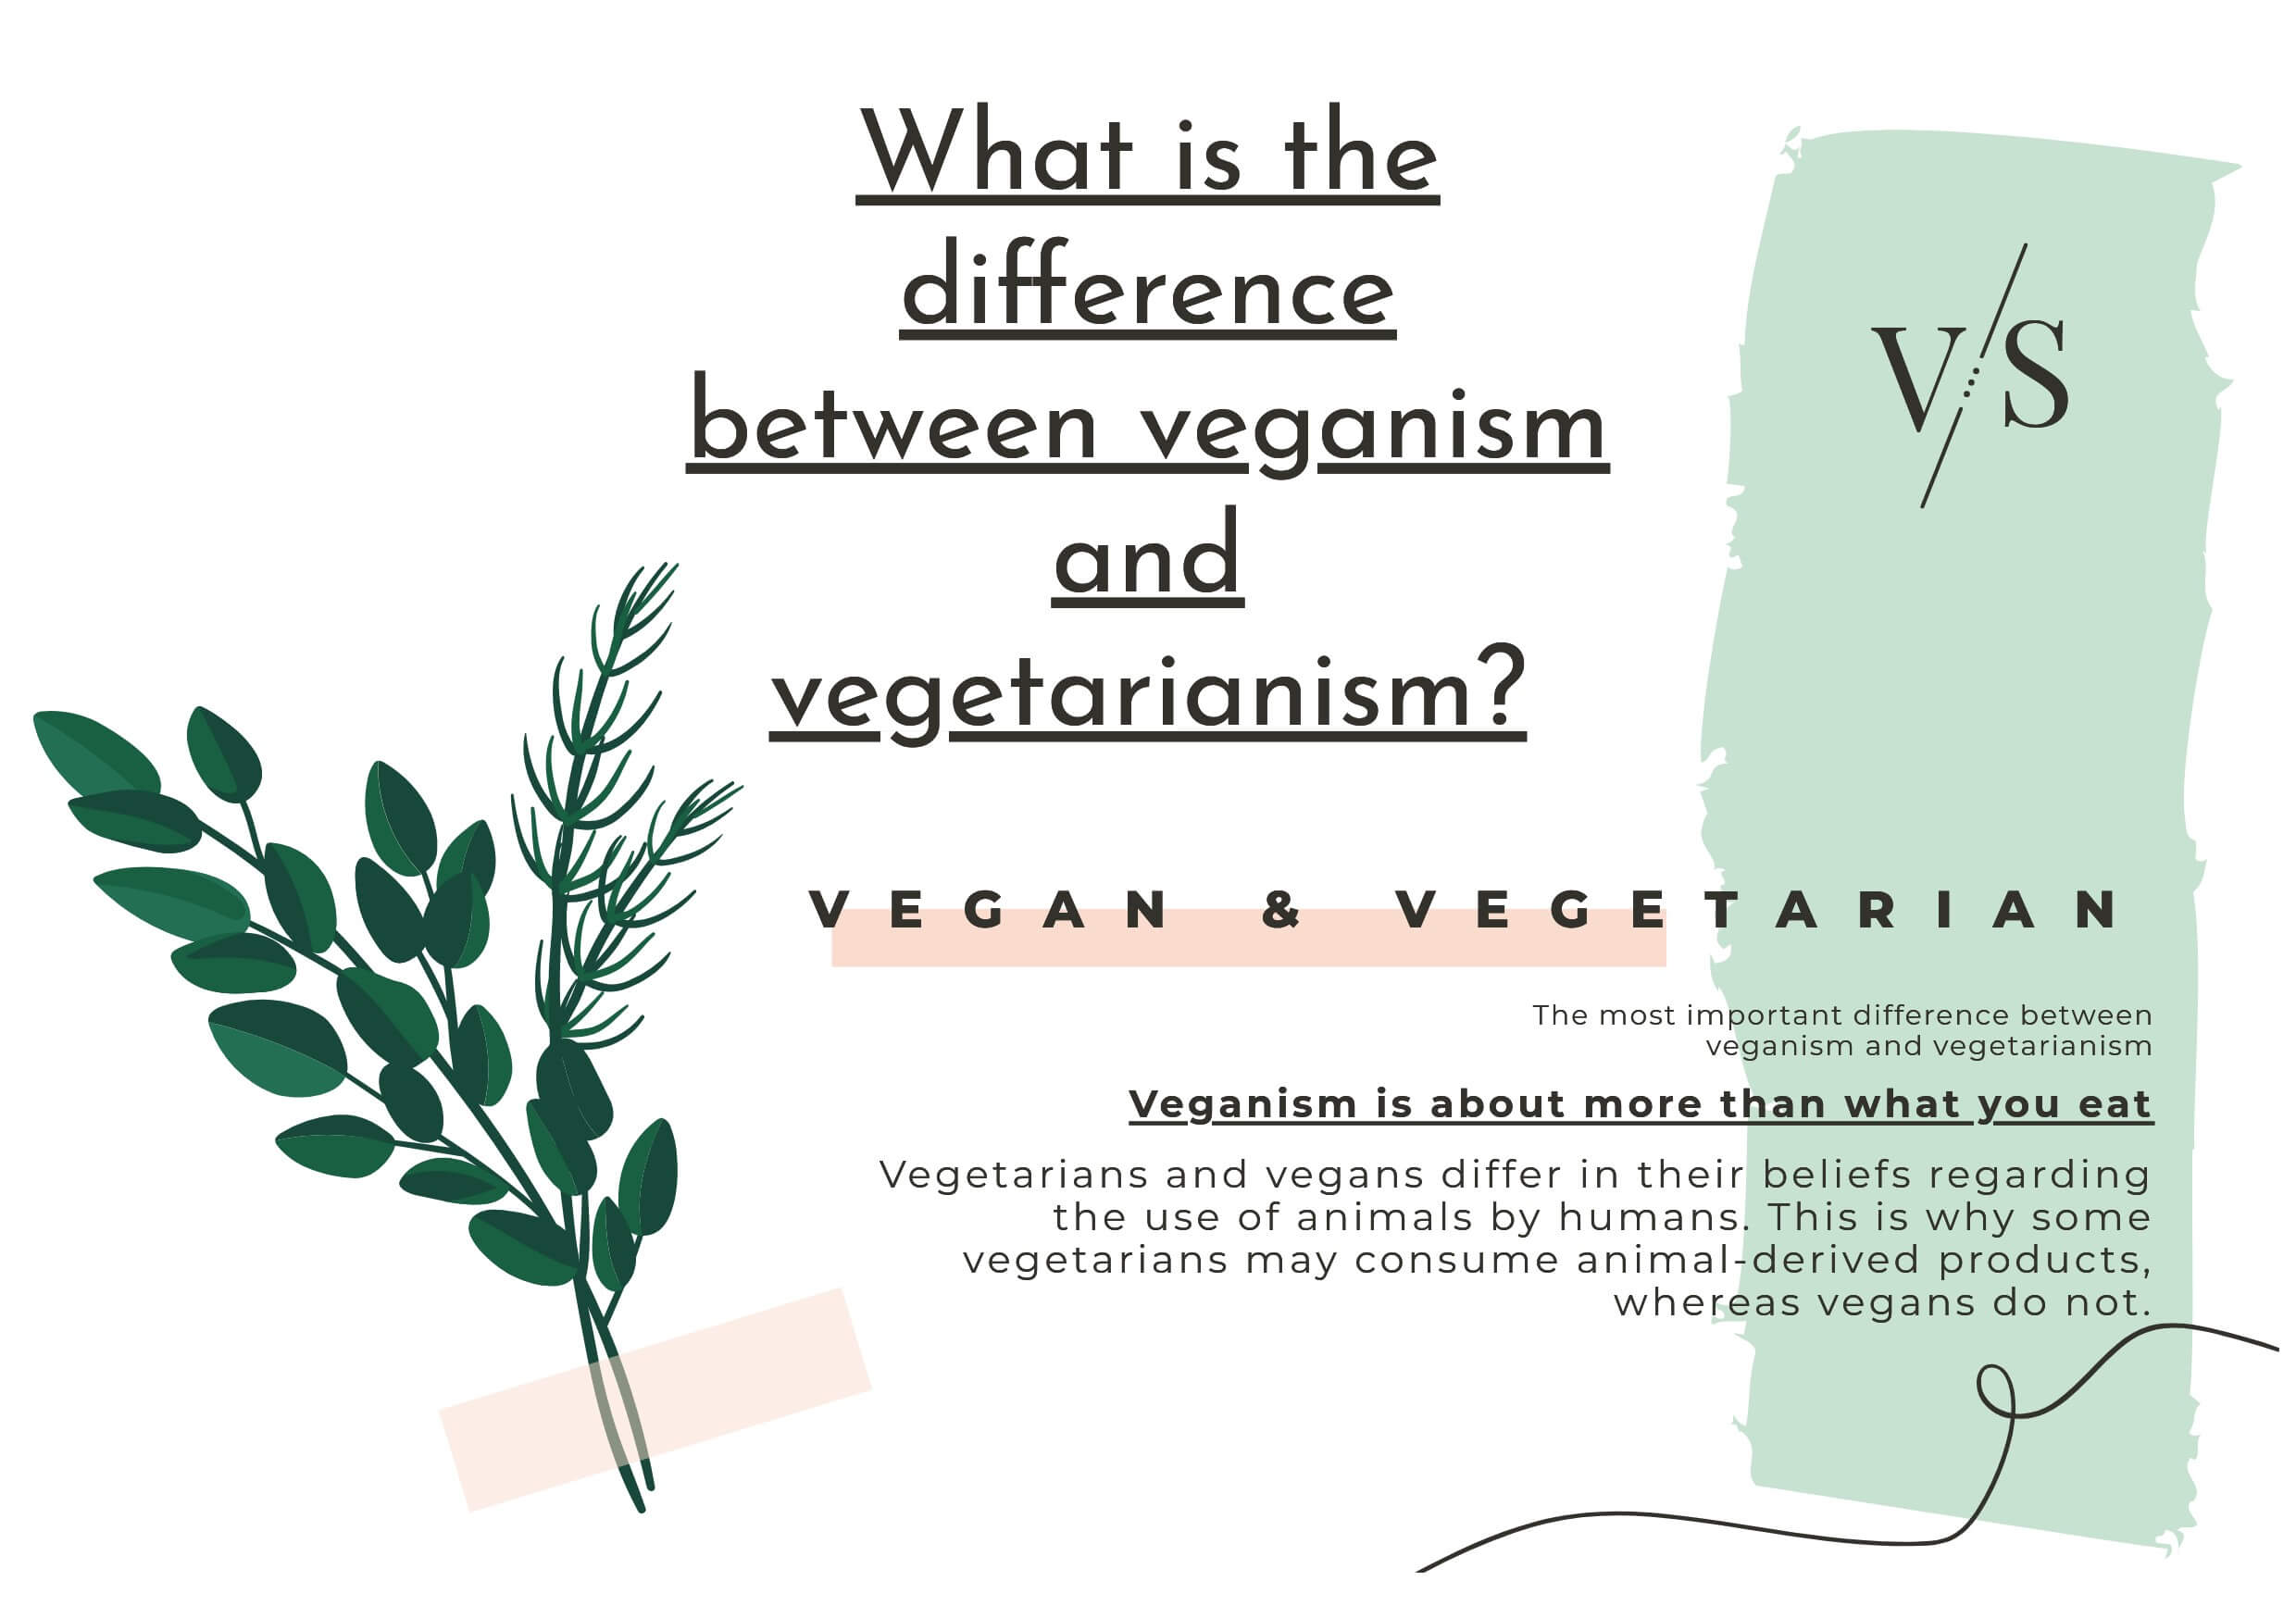 What is the difference between veganism and vegetarianism?